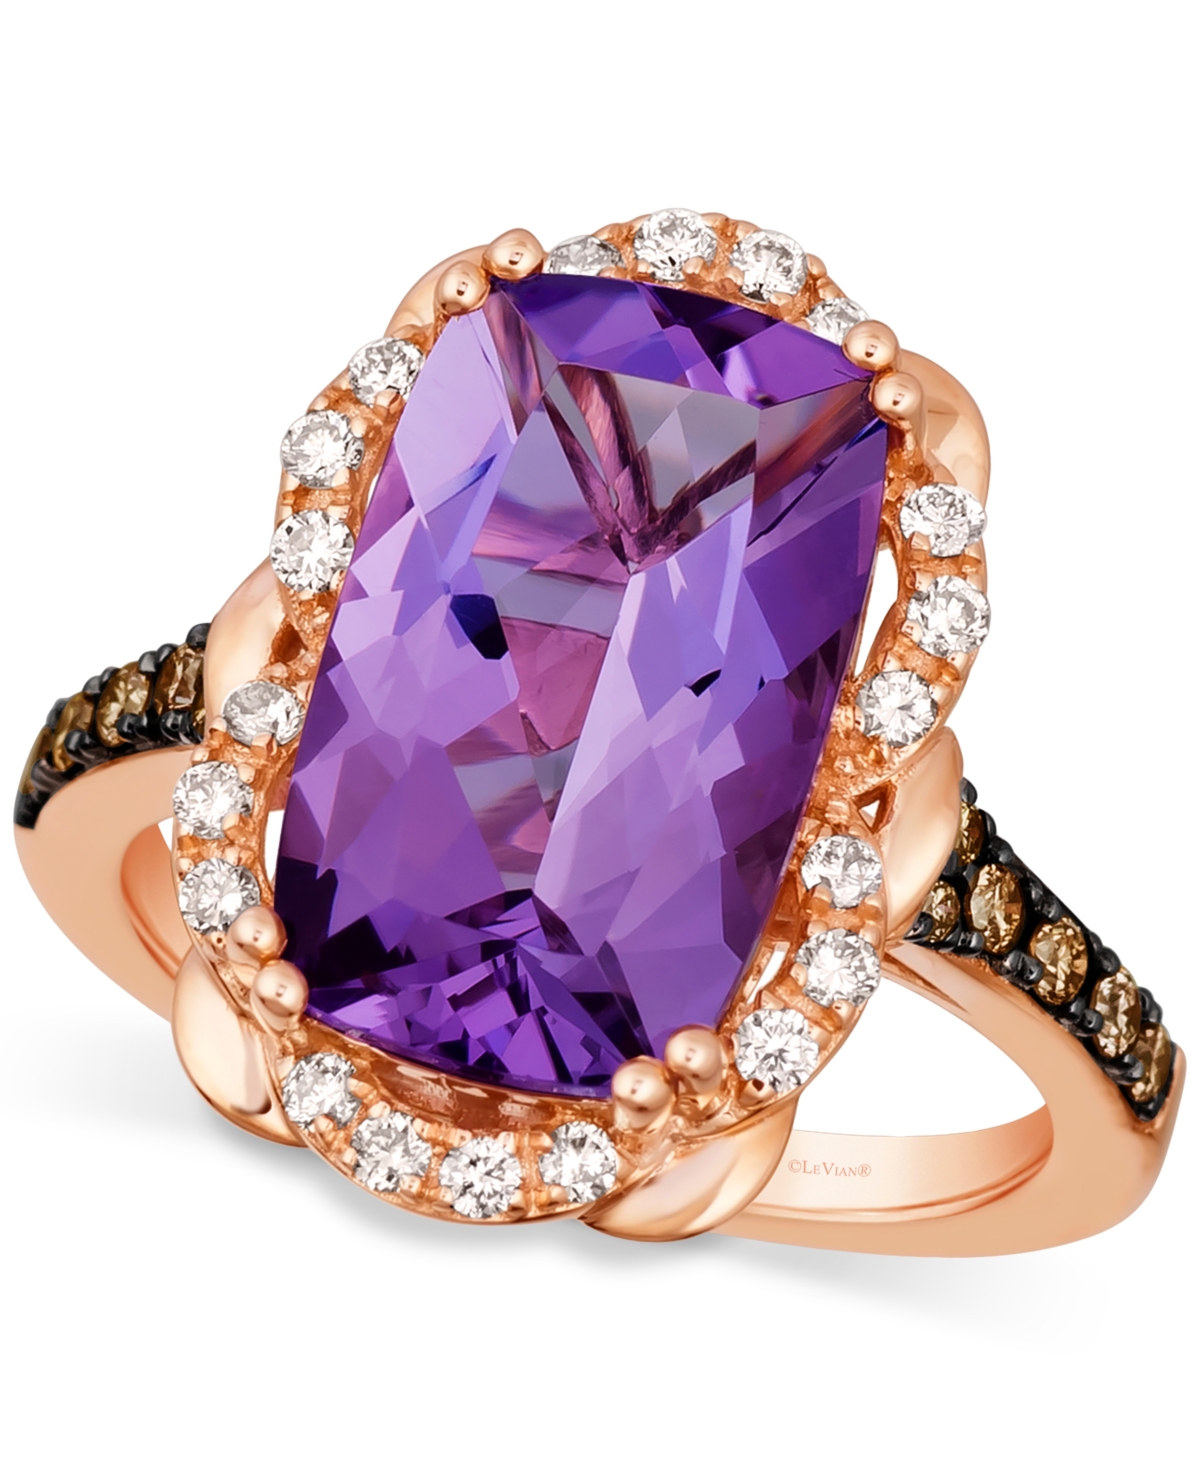 Le Vian Grape Amethyst (5-1/10 Ct. T.w.) & Diamond (3/8 Ct. T.w.) Halo Statement Ring In 14k Rose Gold In K Strawberry Gold Ring